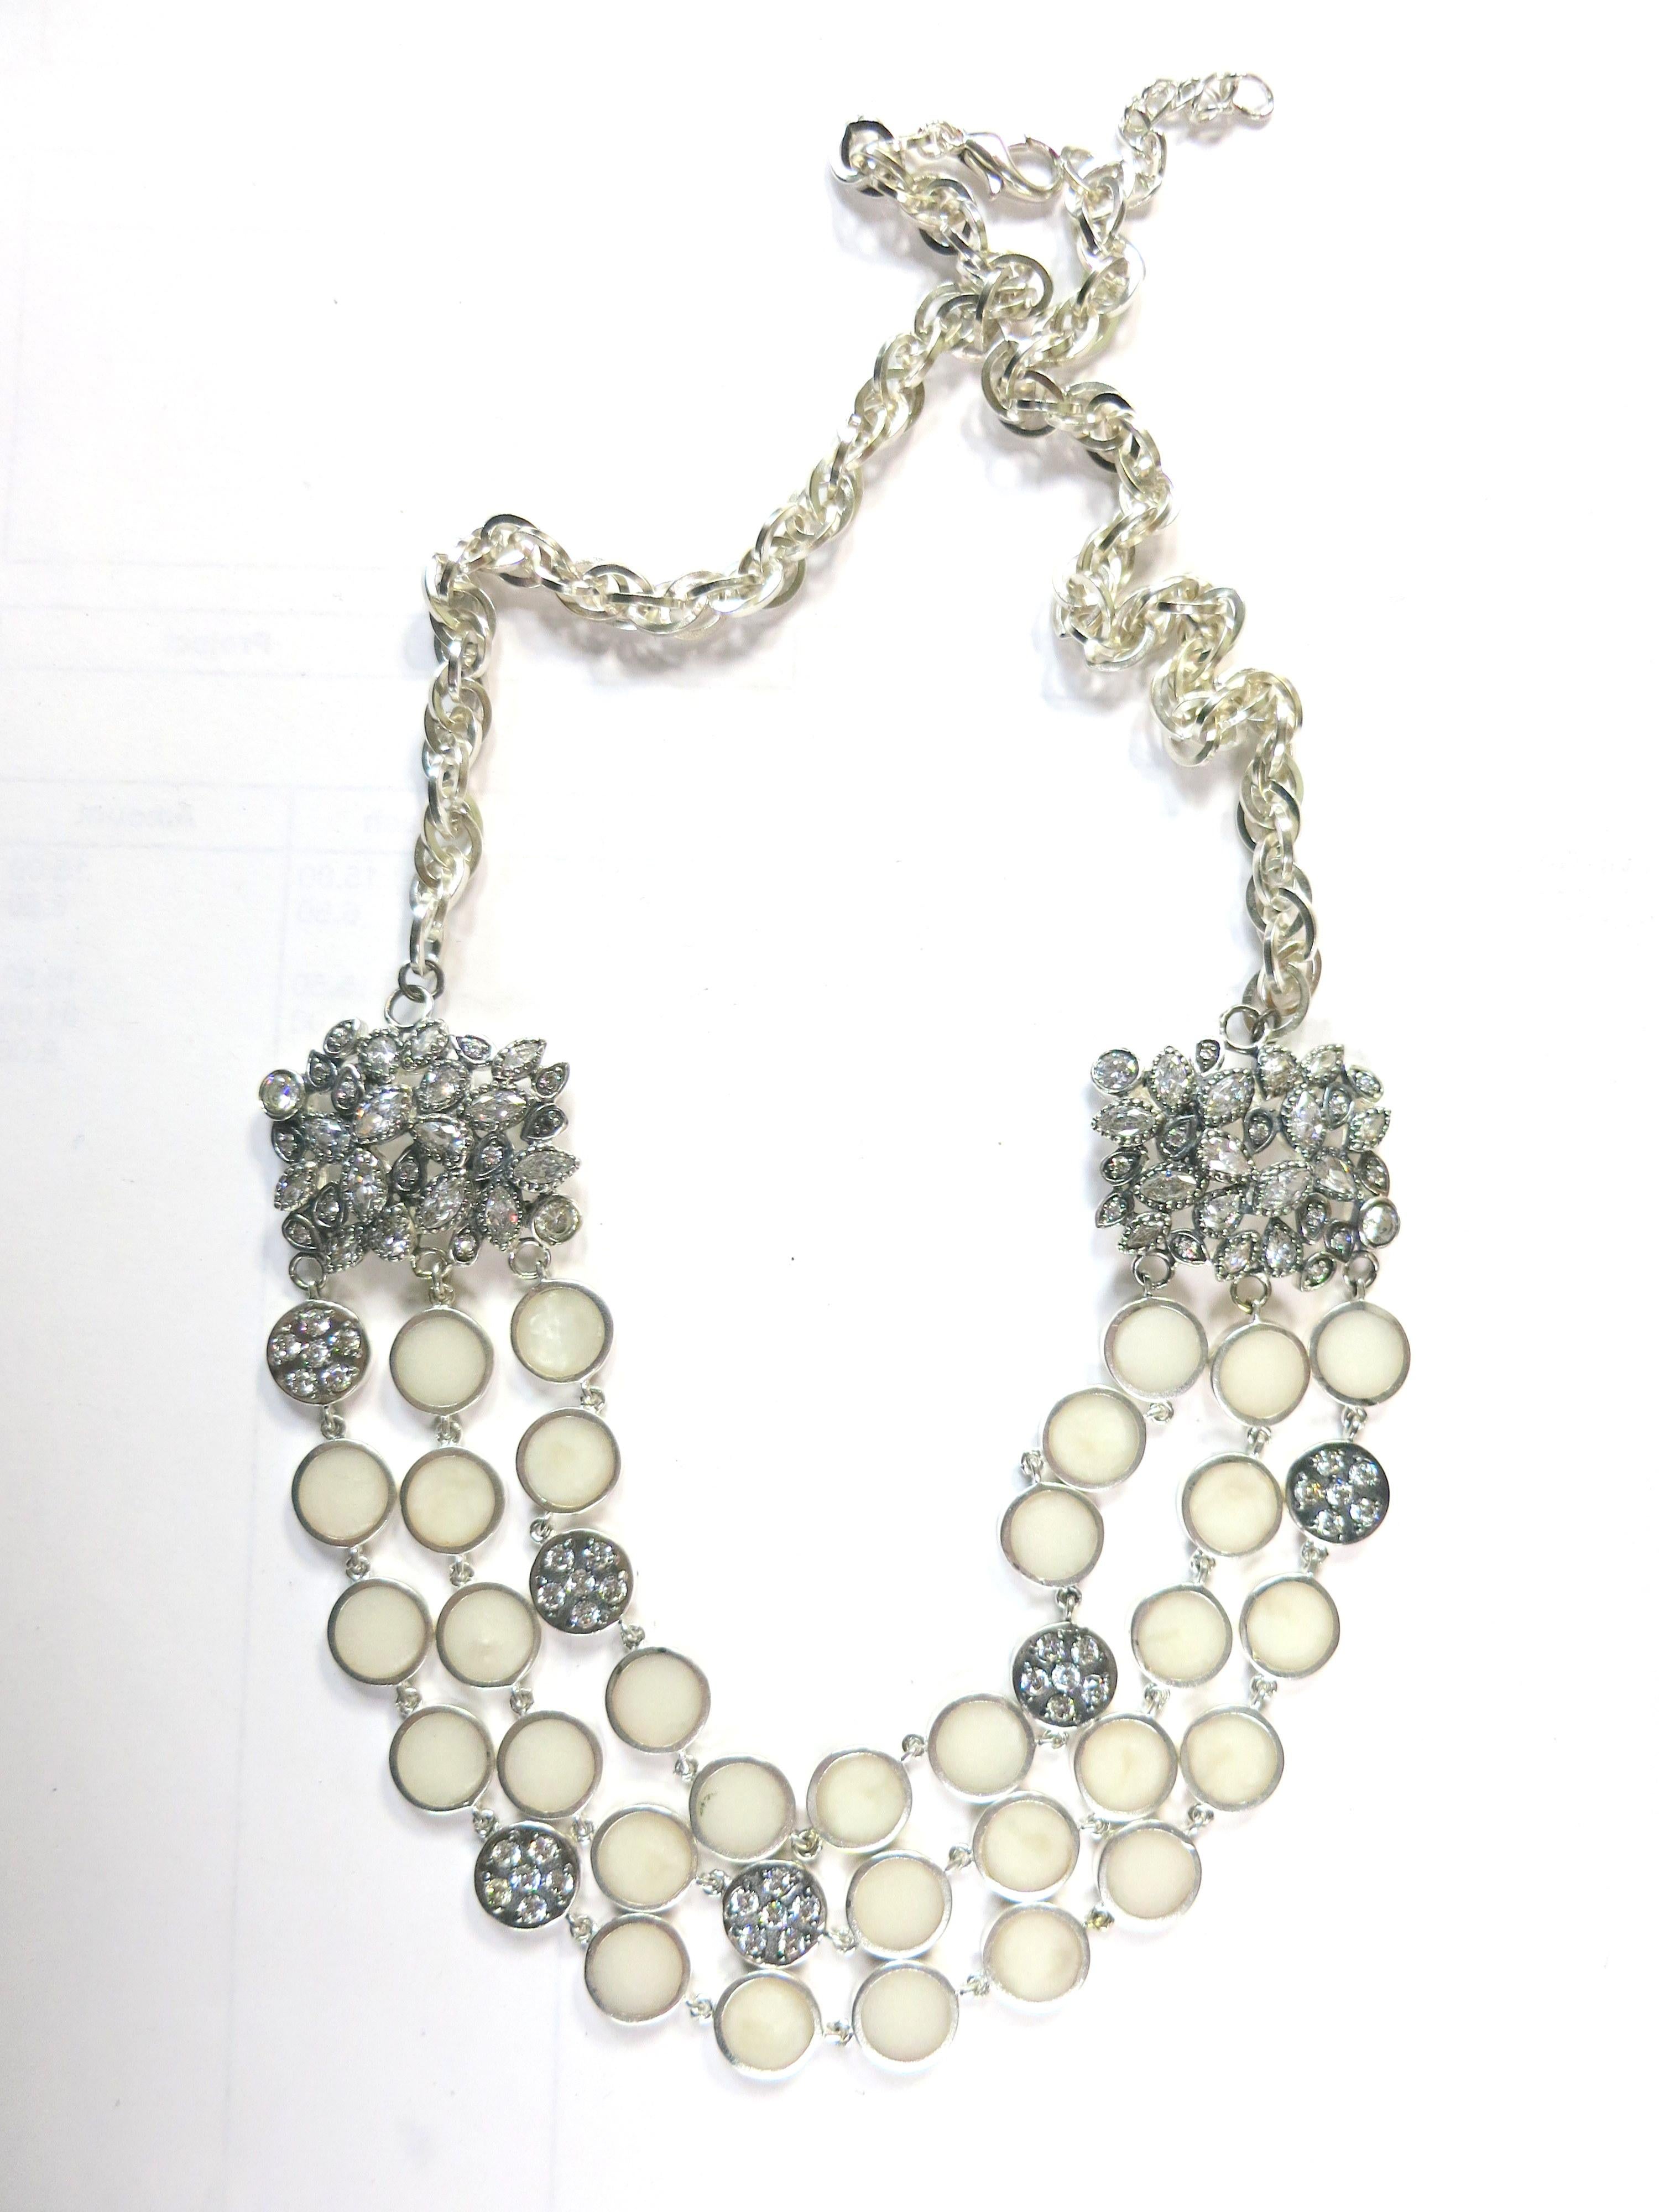 Miriam Salat choker features cascade resin with vintage sterling silver.
Cream / Ivory color resin 
Cubic zircon full diamond facet rounds, prong set.
necklace is chocker length.
Measures apx 16 inches
1/2 inches in width. Total weight is approx 150